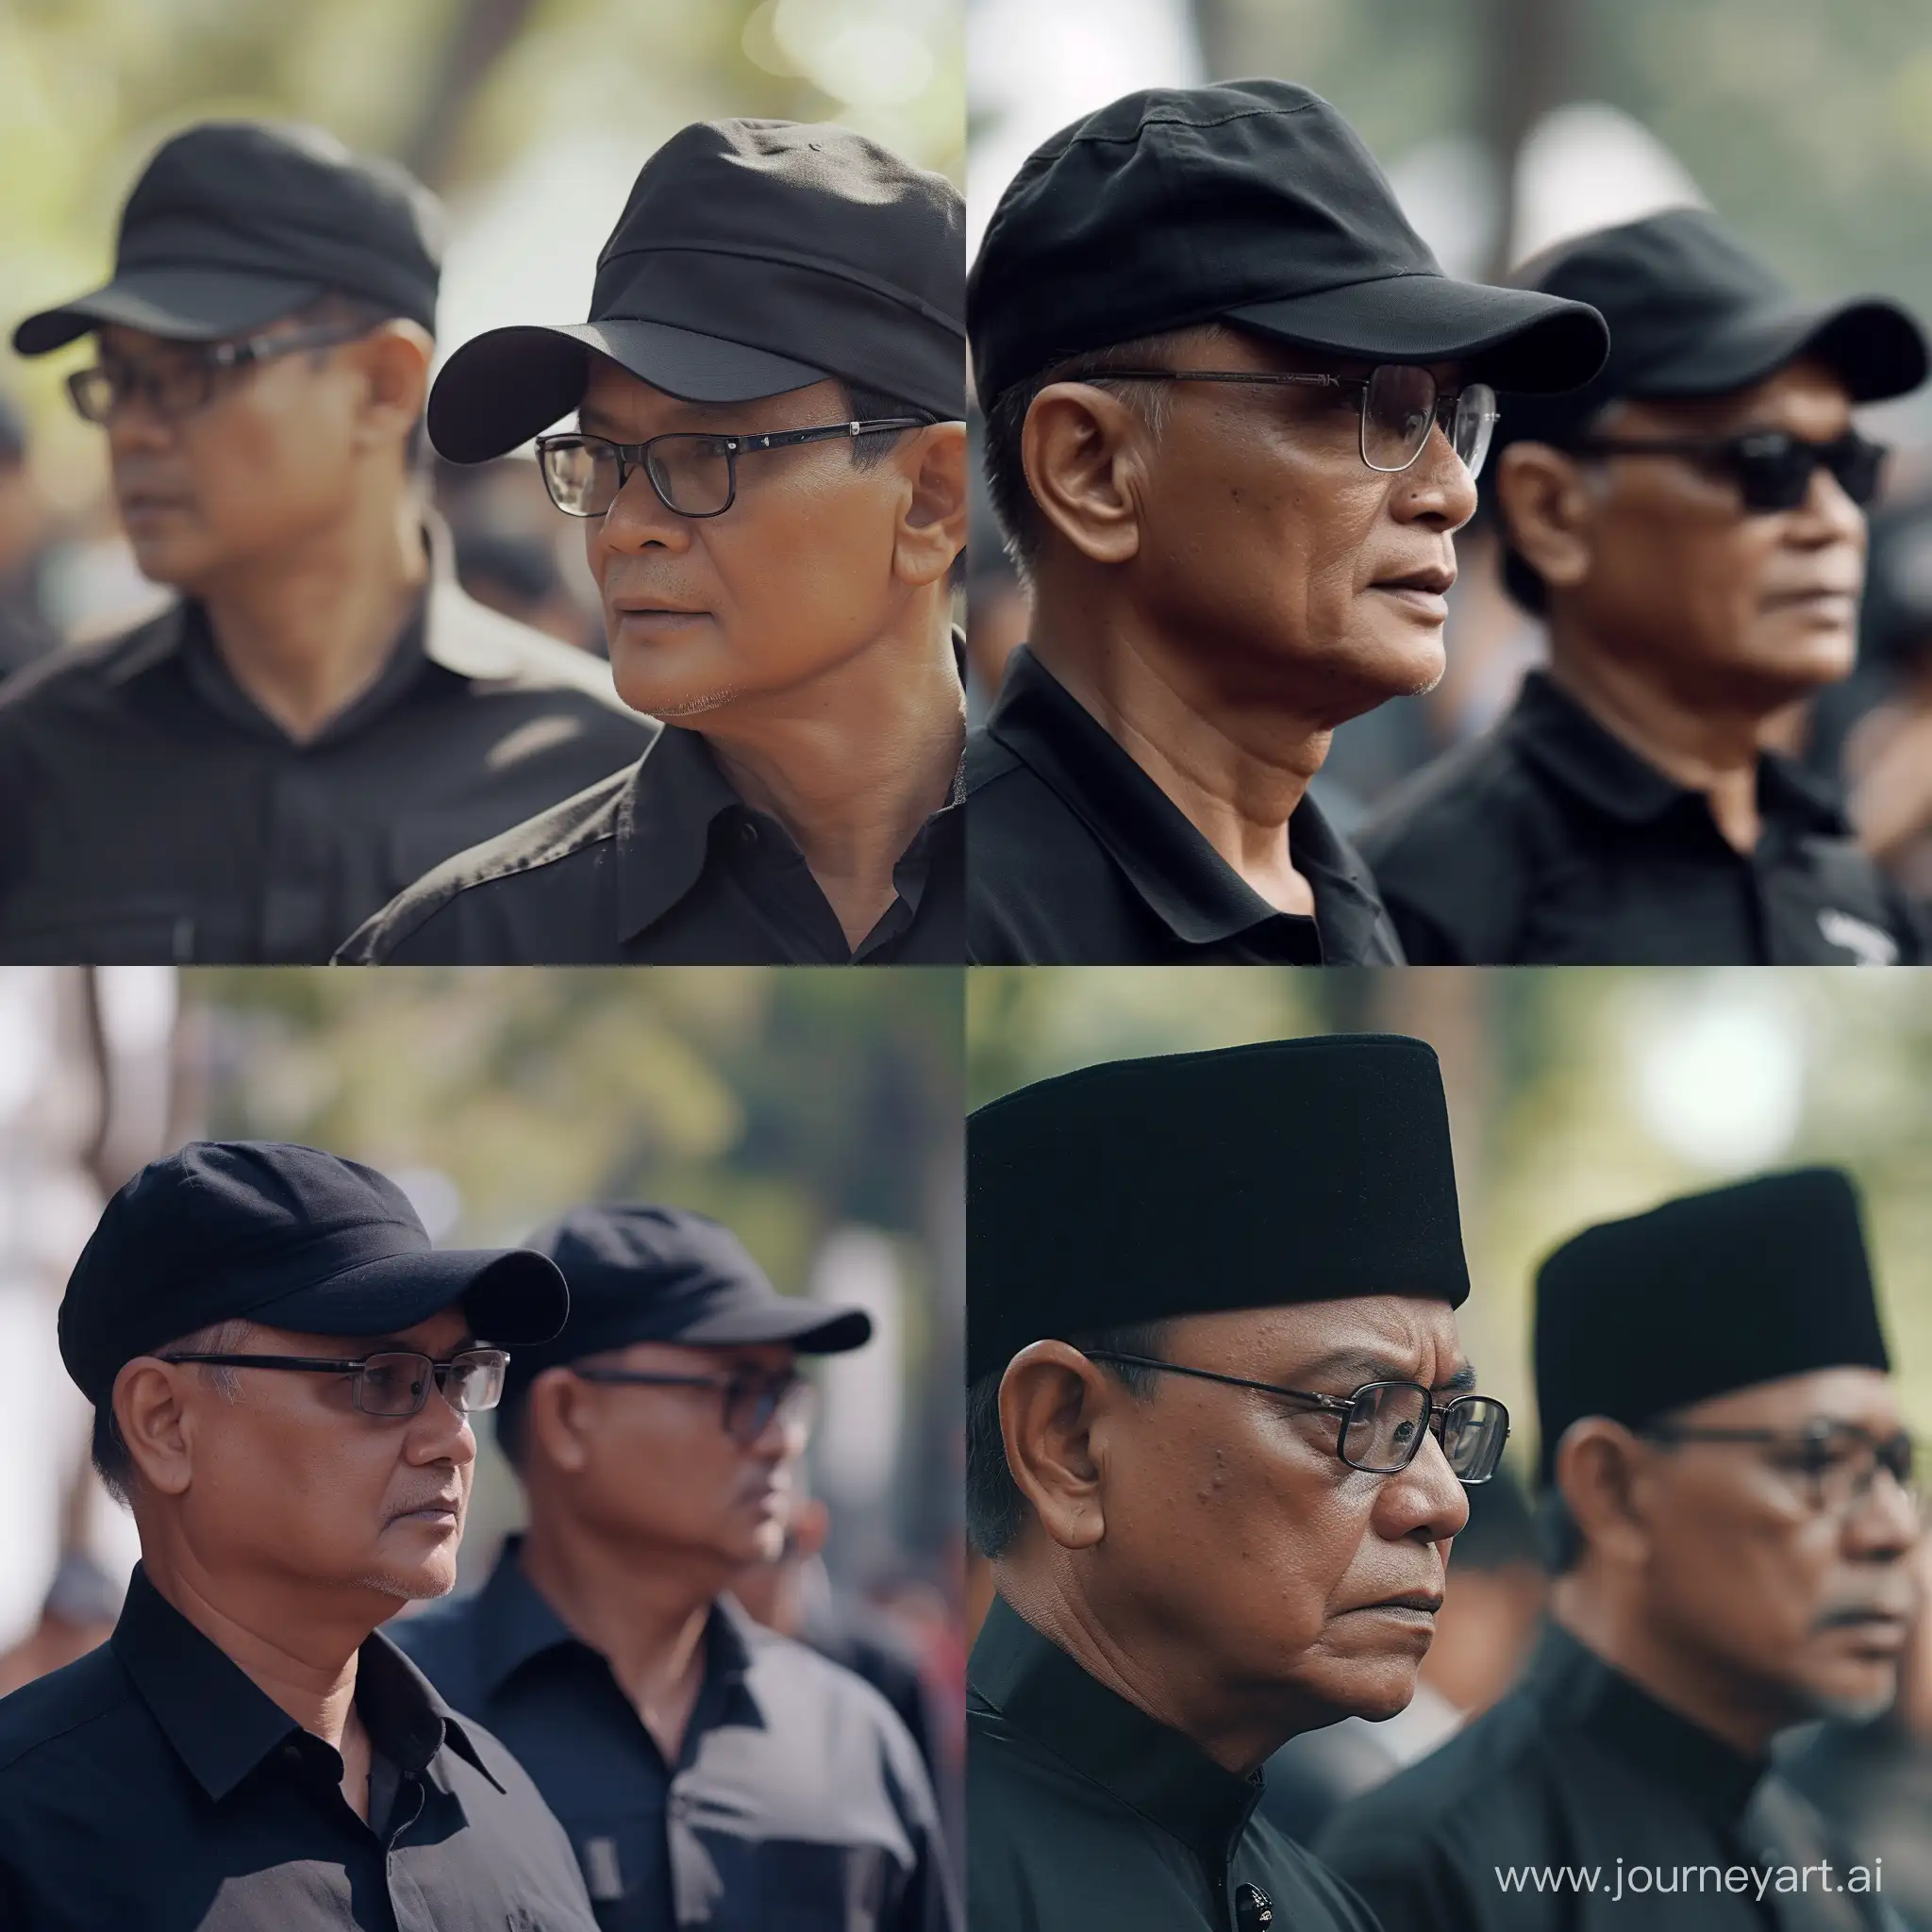 Indonesian-Presidential-Candidates-Stroll-in-Black-Caps-and-Glasses